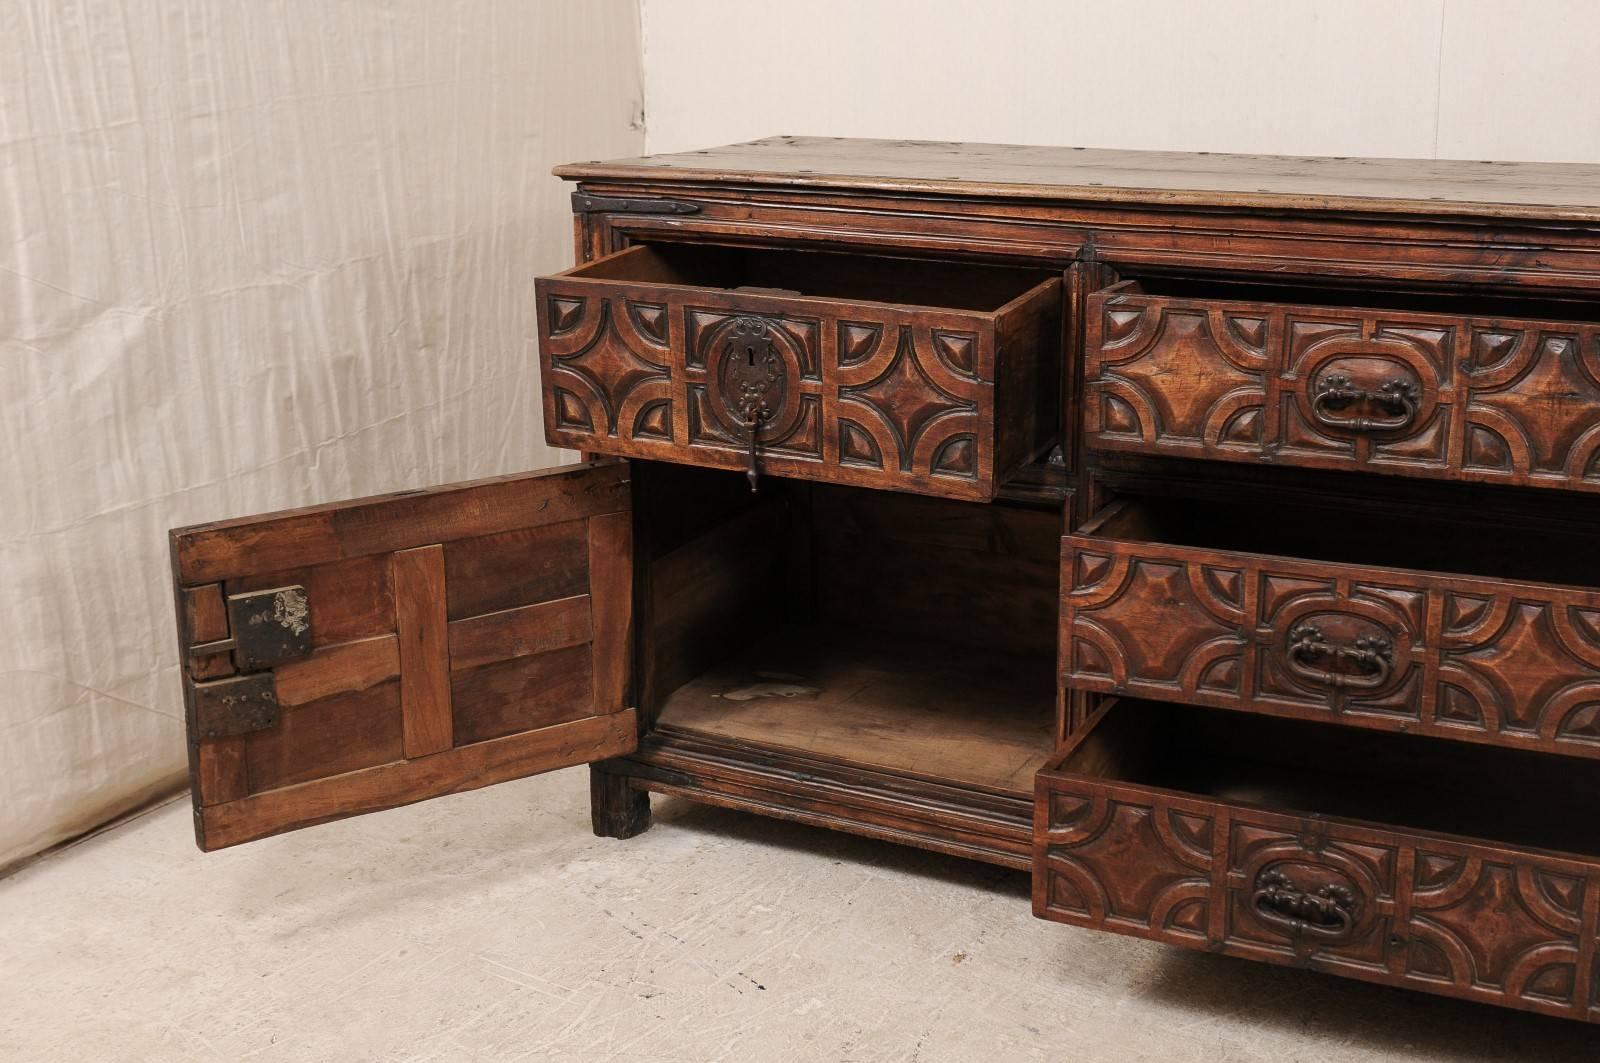 Metal Exquisite 18th Century Spanish Sacristy Chest with Carved Wood Detailed Pattern